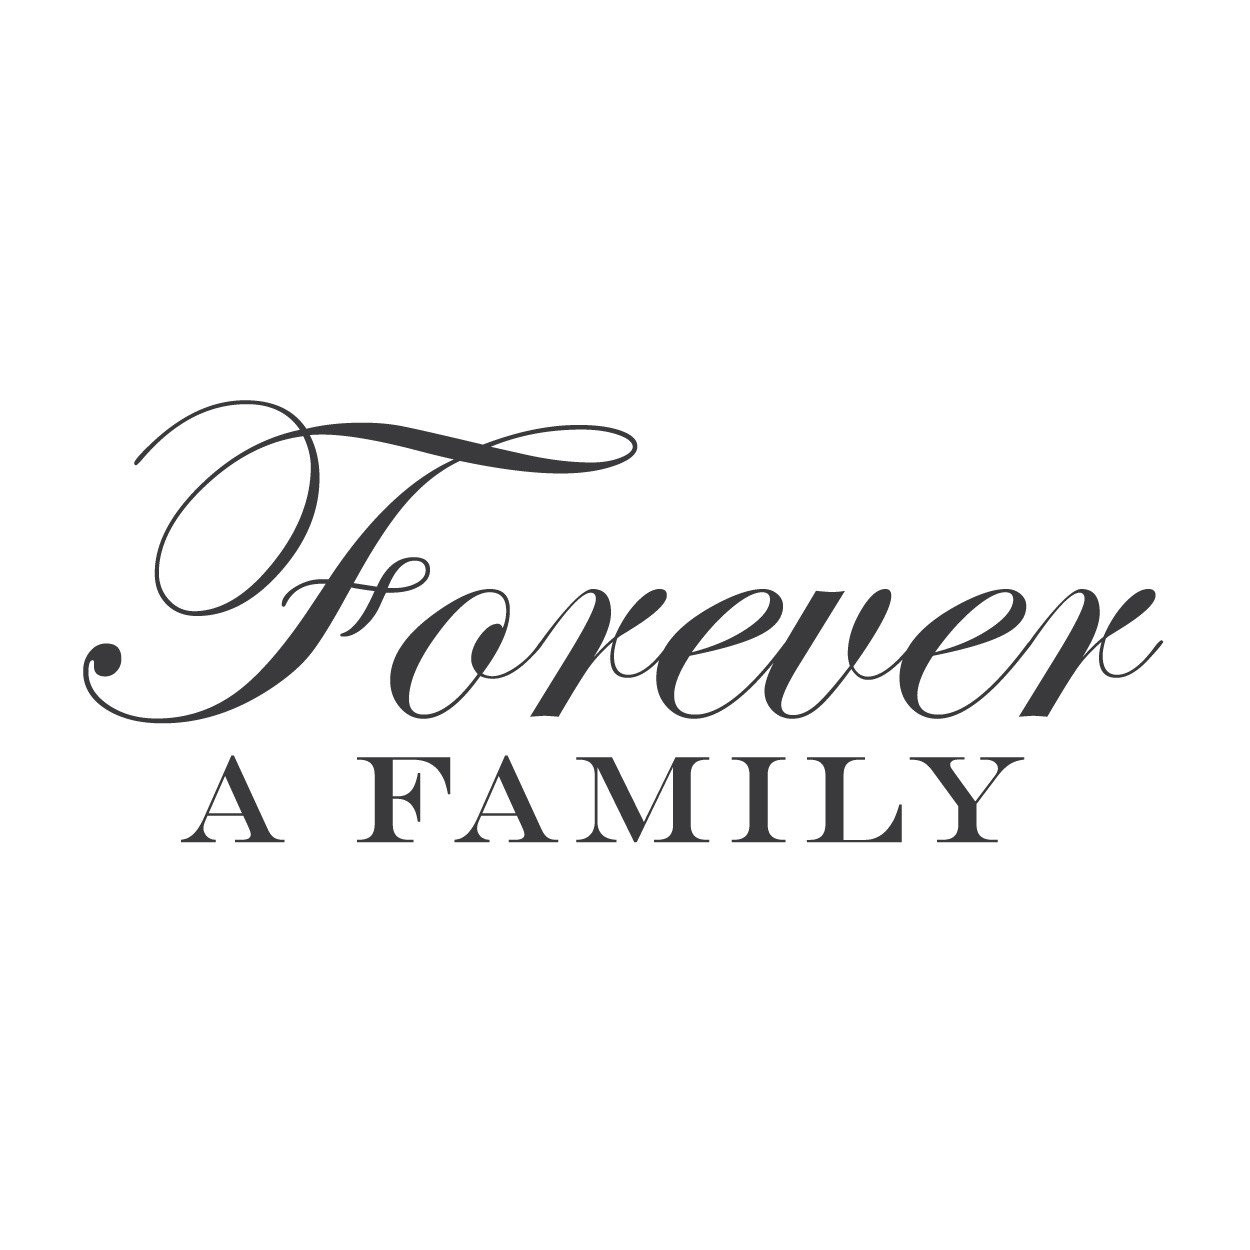 Family First Quotes And Sayings
 Put Family First Quotes QuotesGram